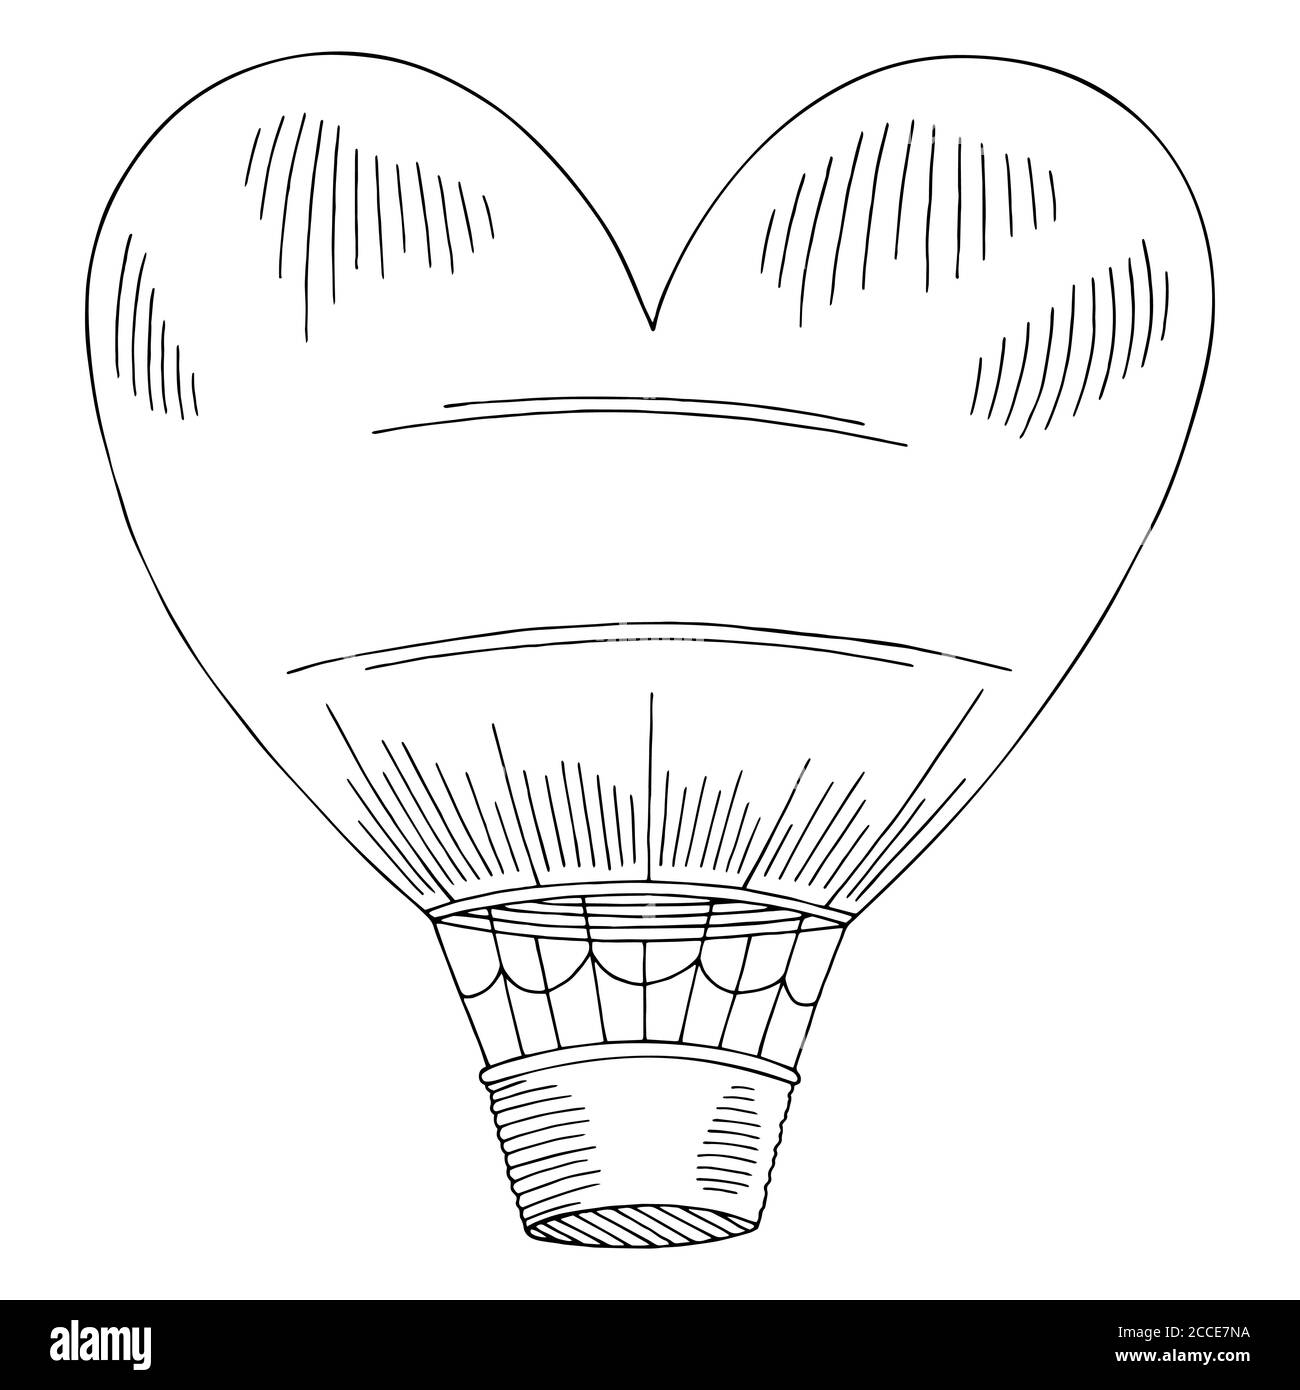 Heart air balloon black white graphic isolated sketch illustration vector Stock Vector